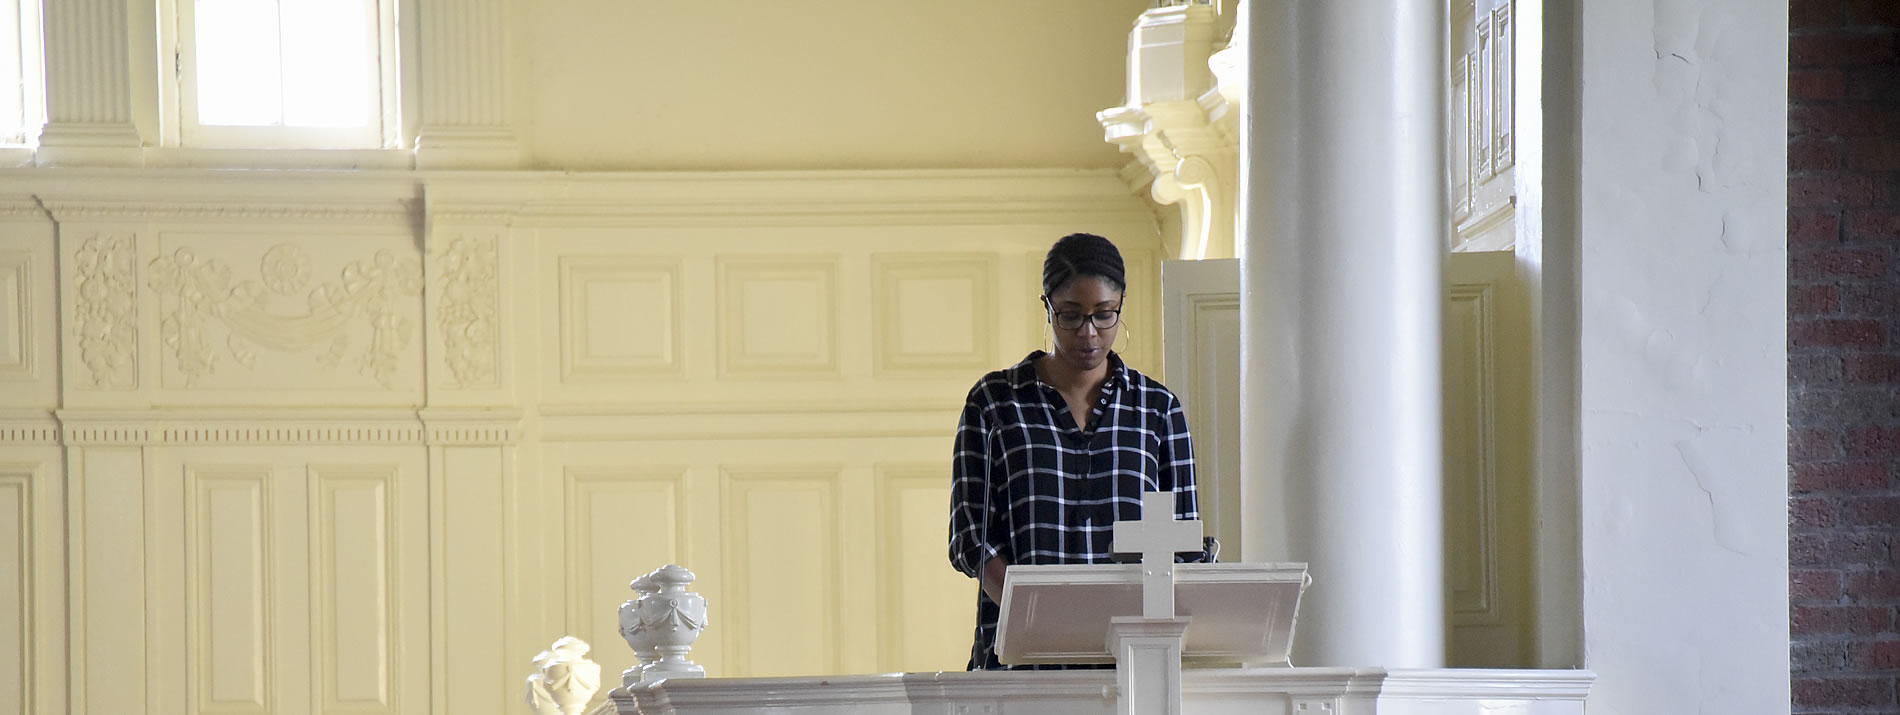 Woman reading at a pulpit